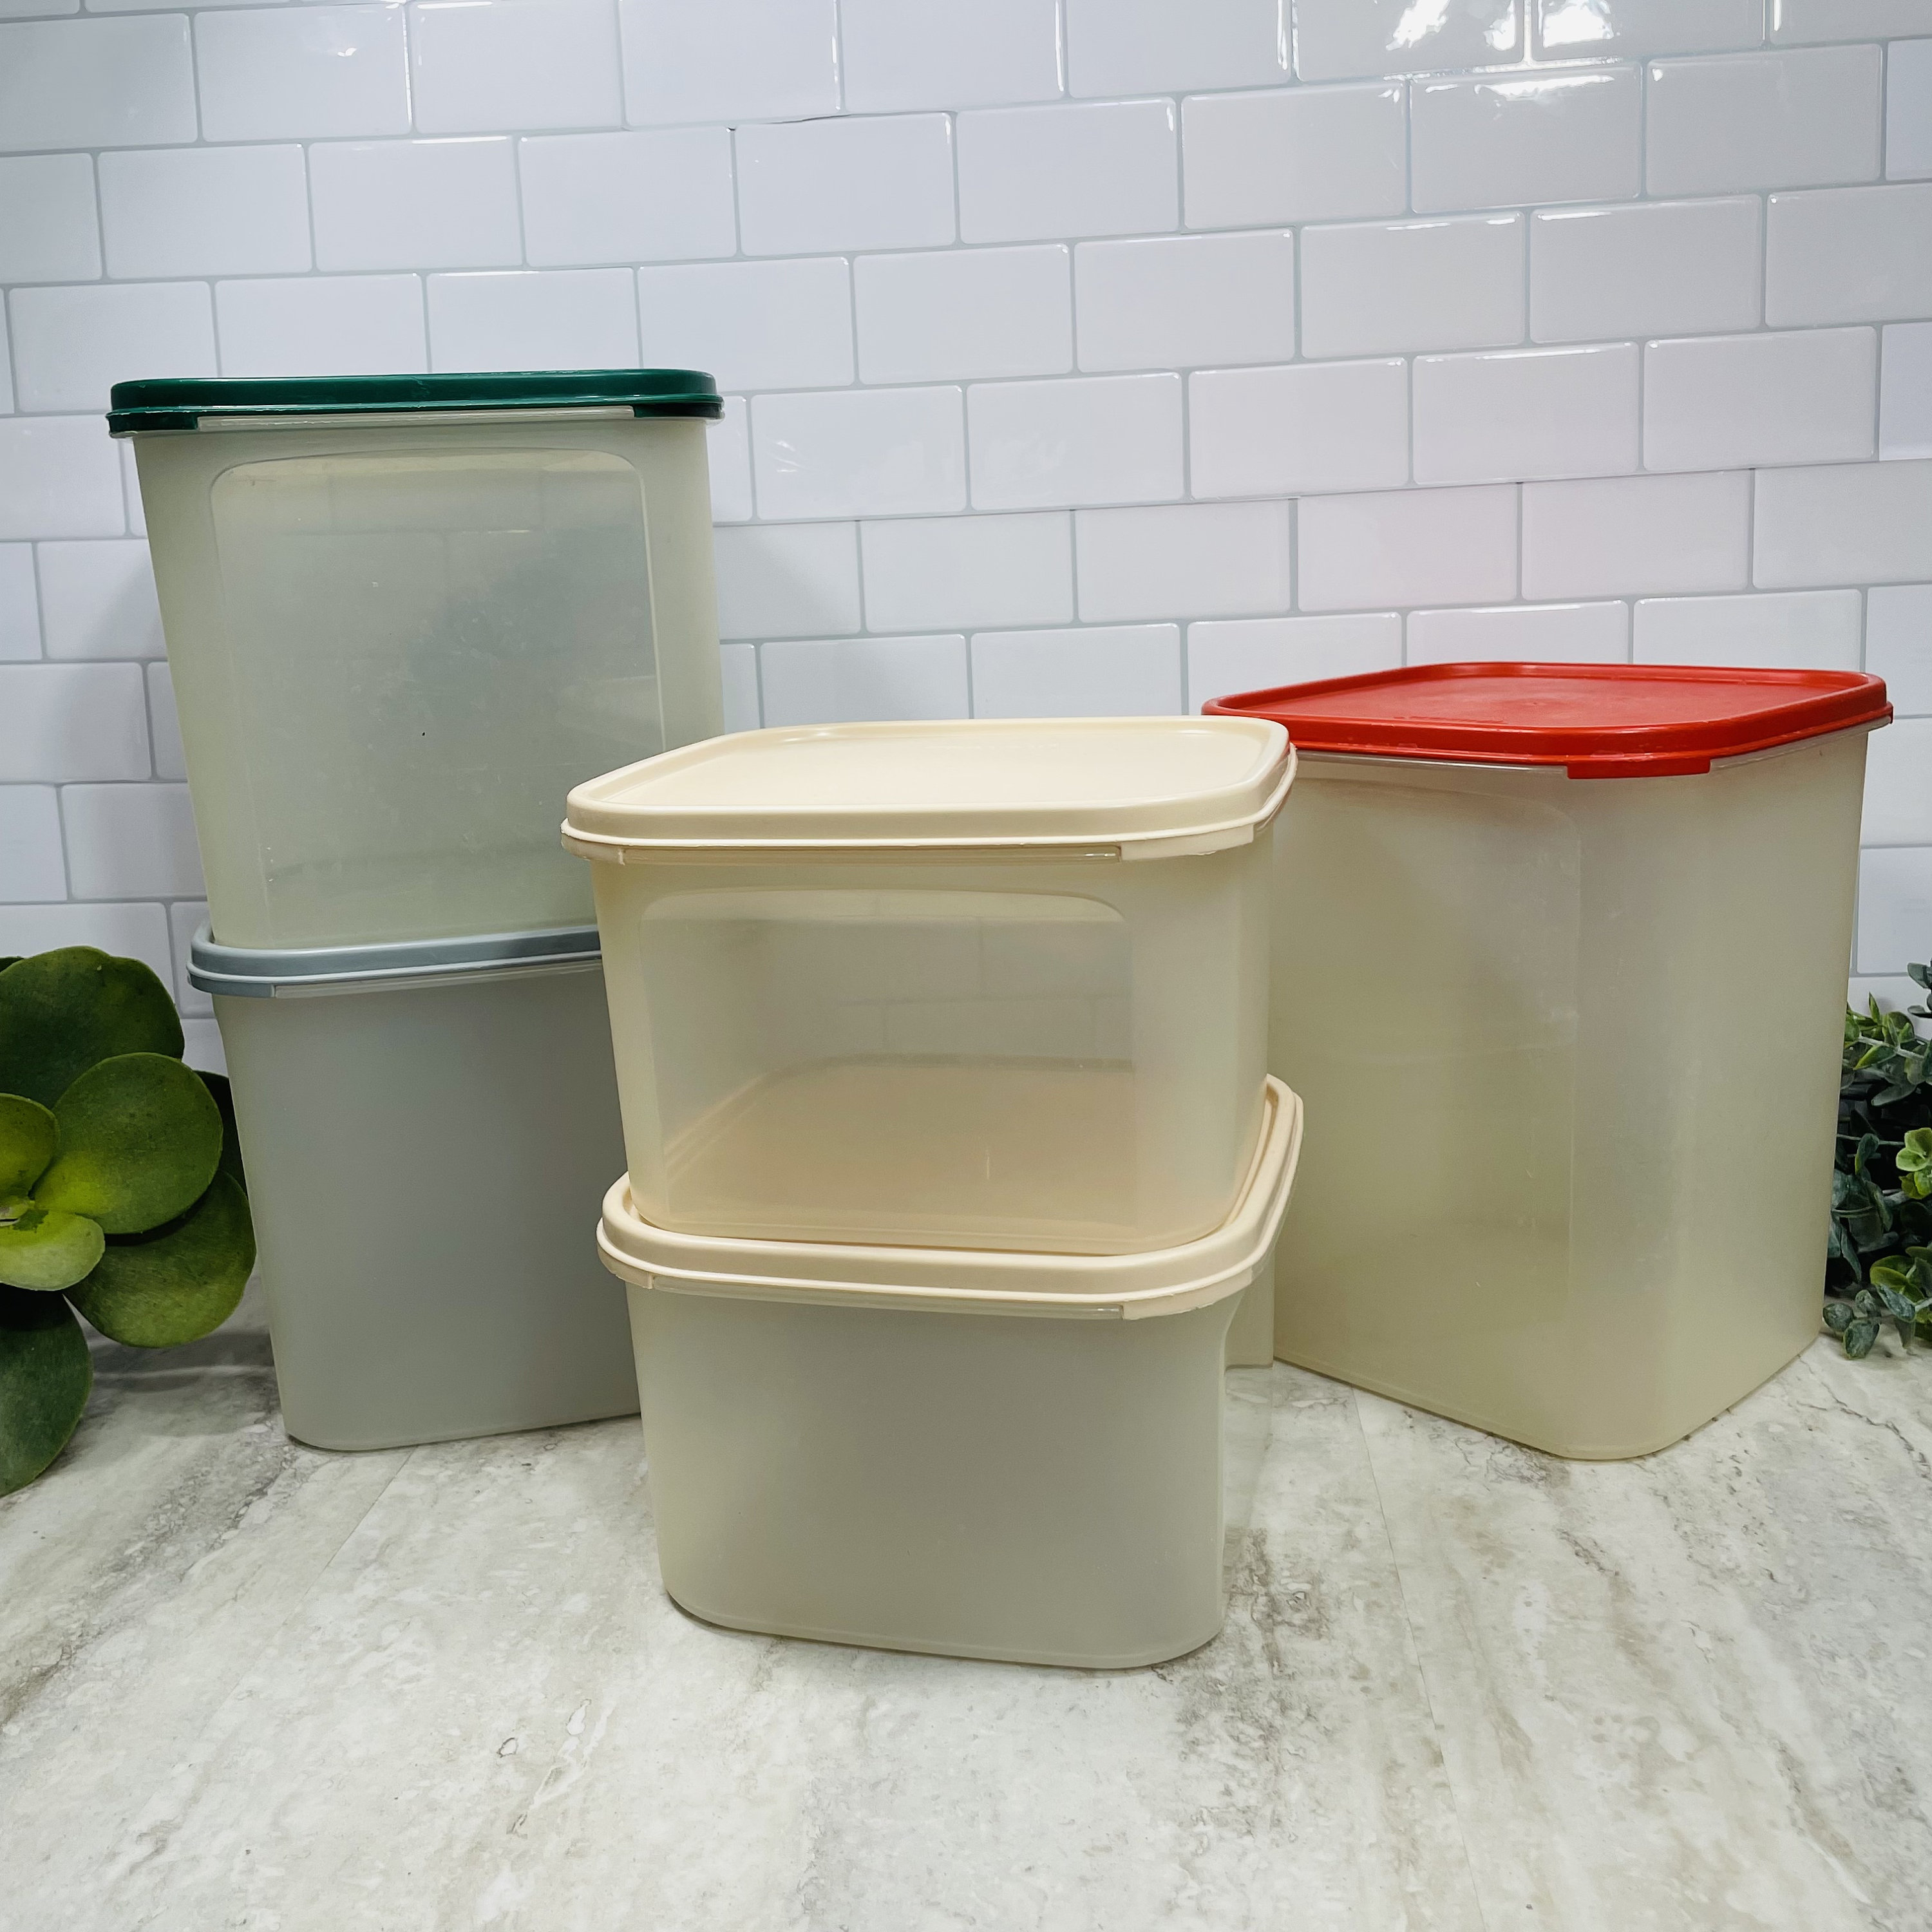 Tupperware Modular Mates - Get Your Pantry, Cabinets, & Kitchen